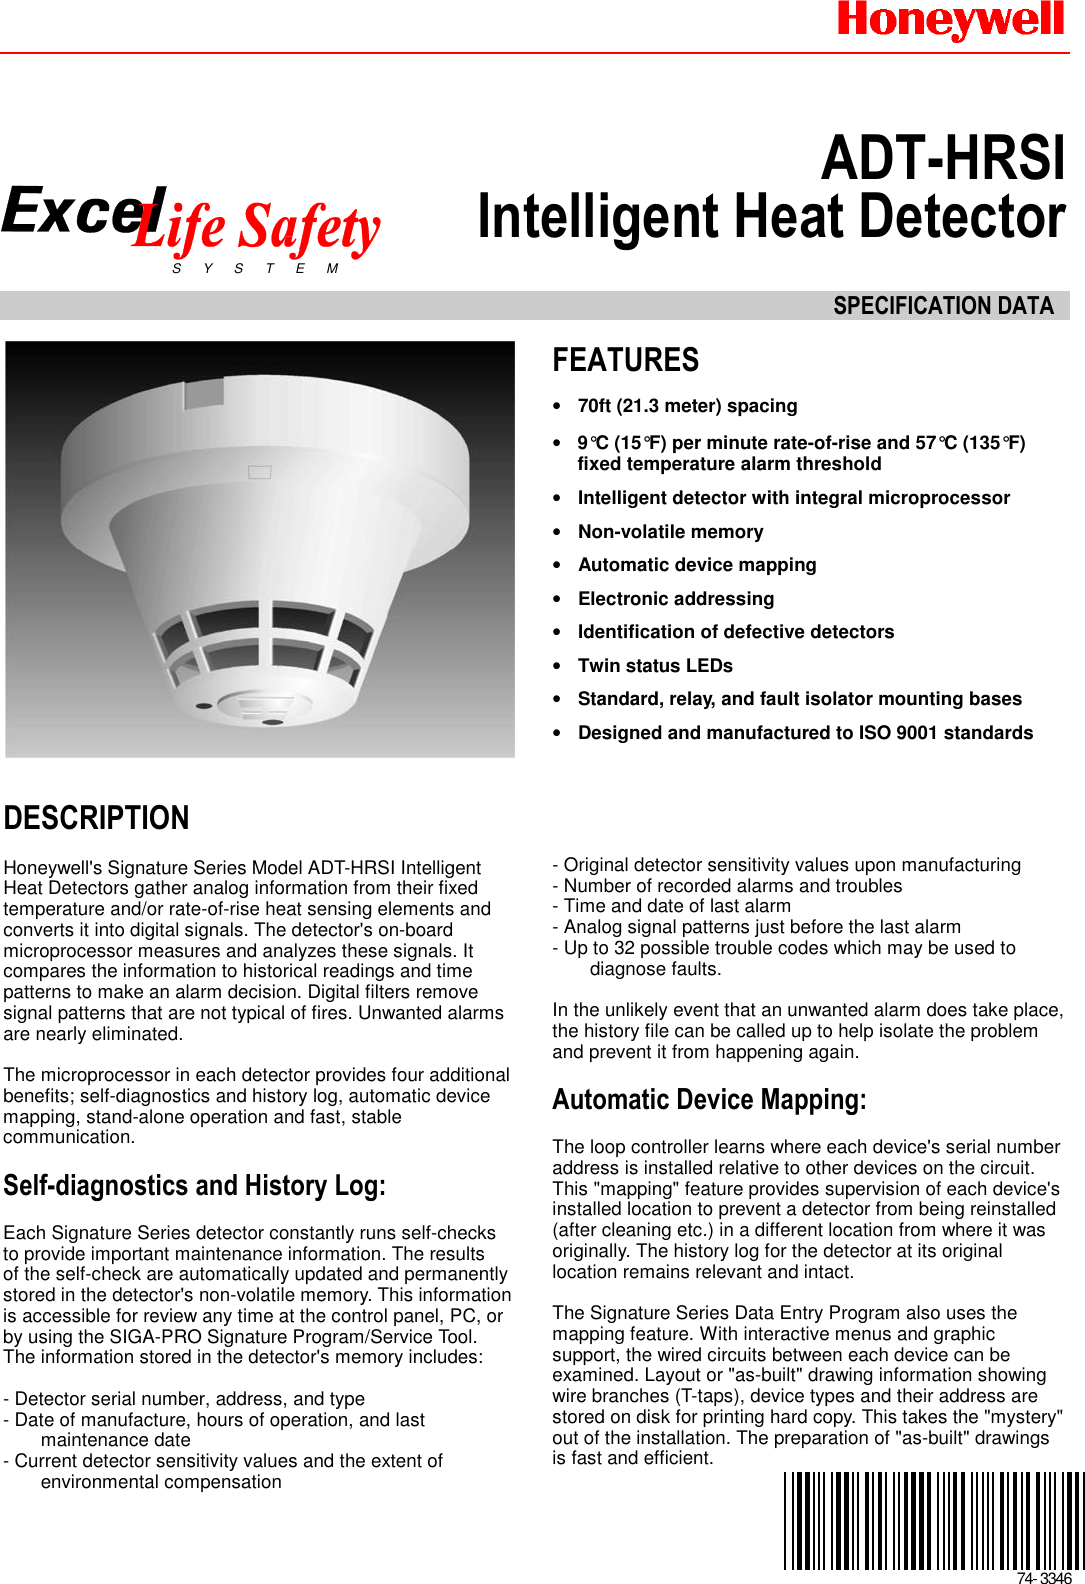 Page 1 of 4 - Honeywell Honeywell-Excel-Adt-Hrsi-Users-Manual- 74-3346 - ADT-HRSI Intelligent Heat Detector  Honeywell-excel-adt-hrsi-users-manual